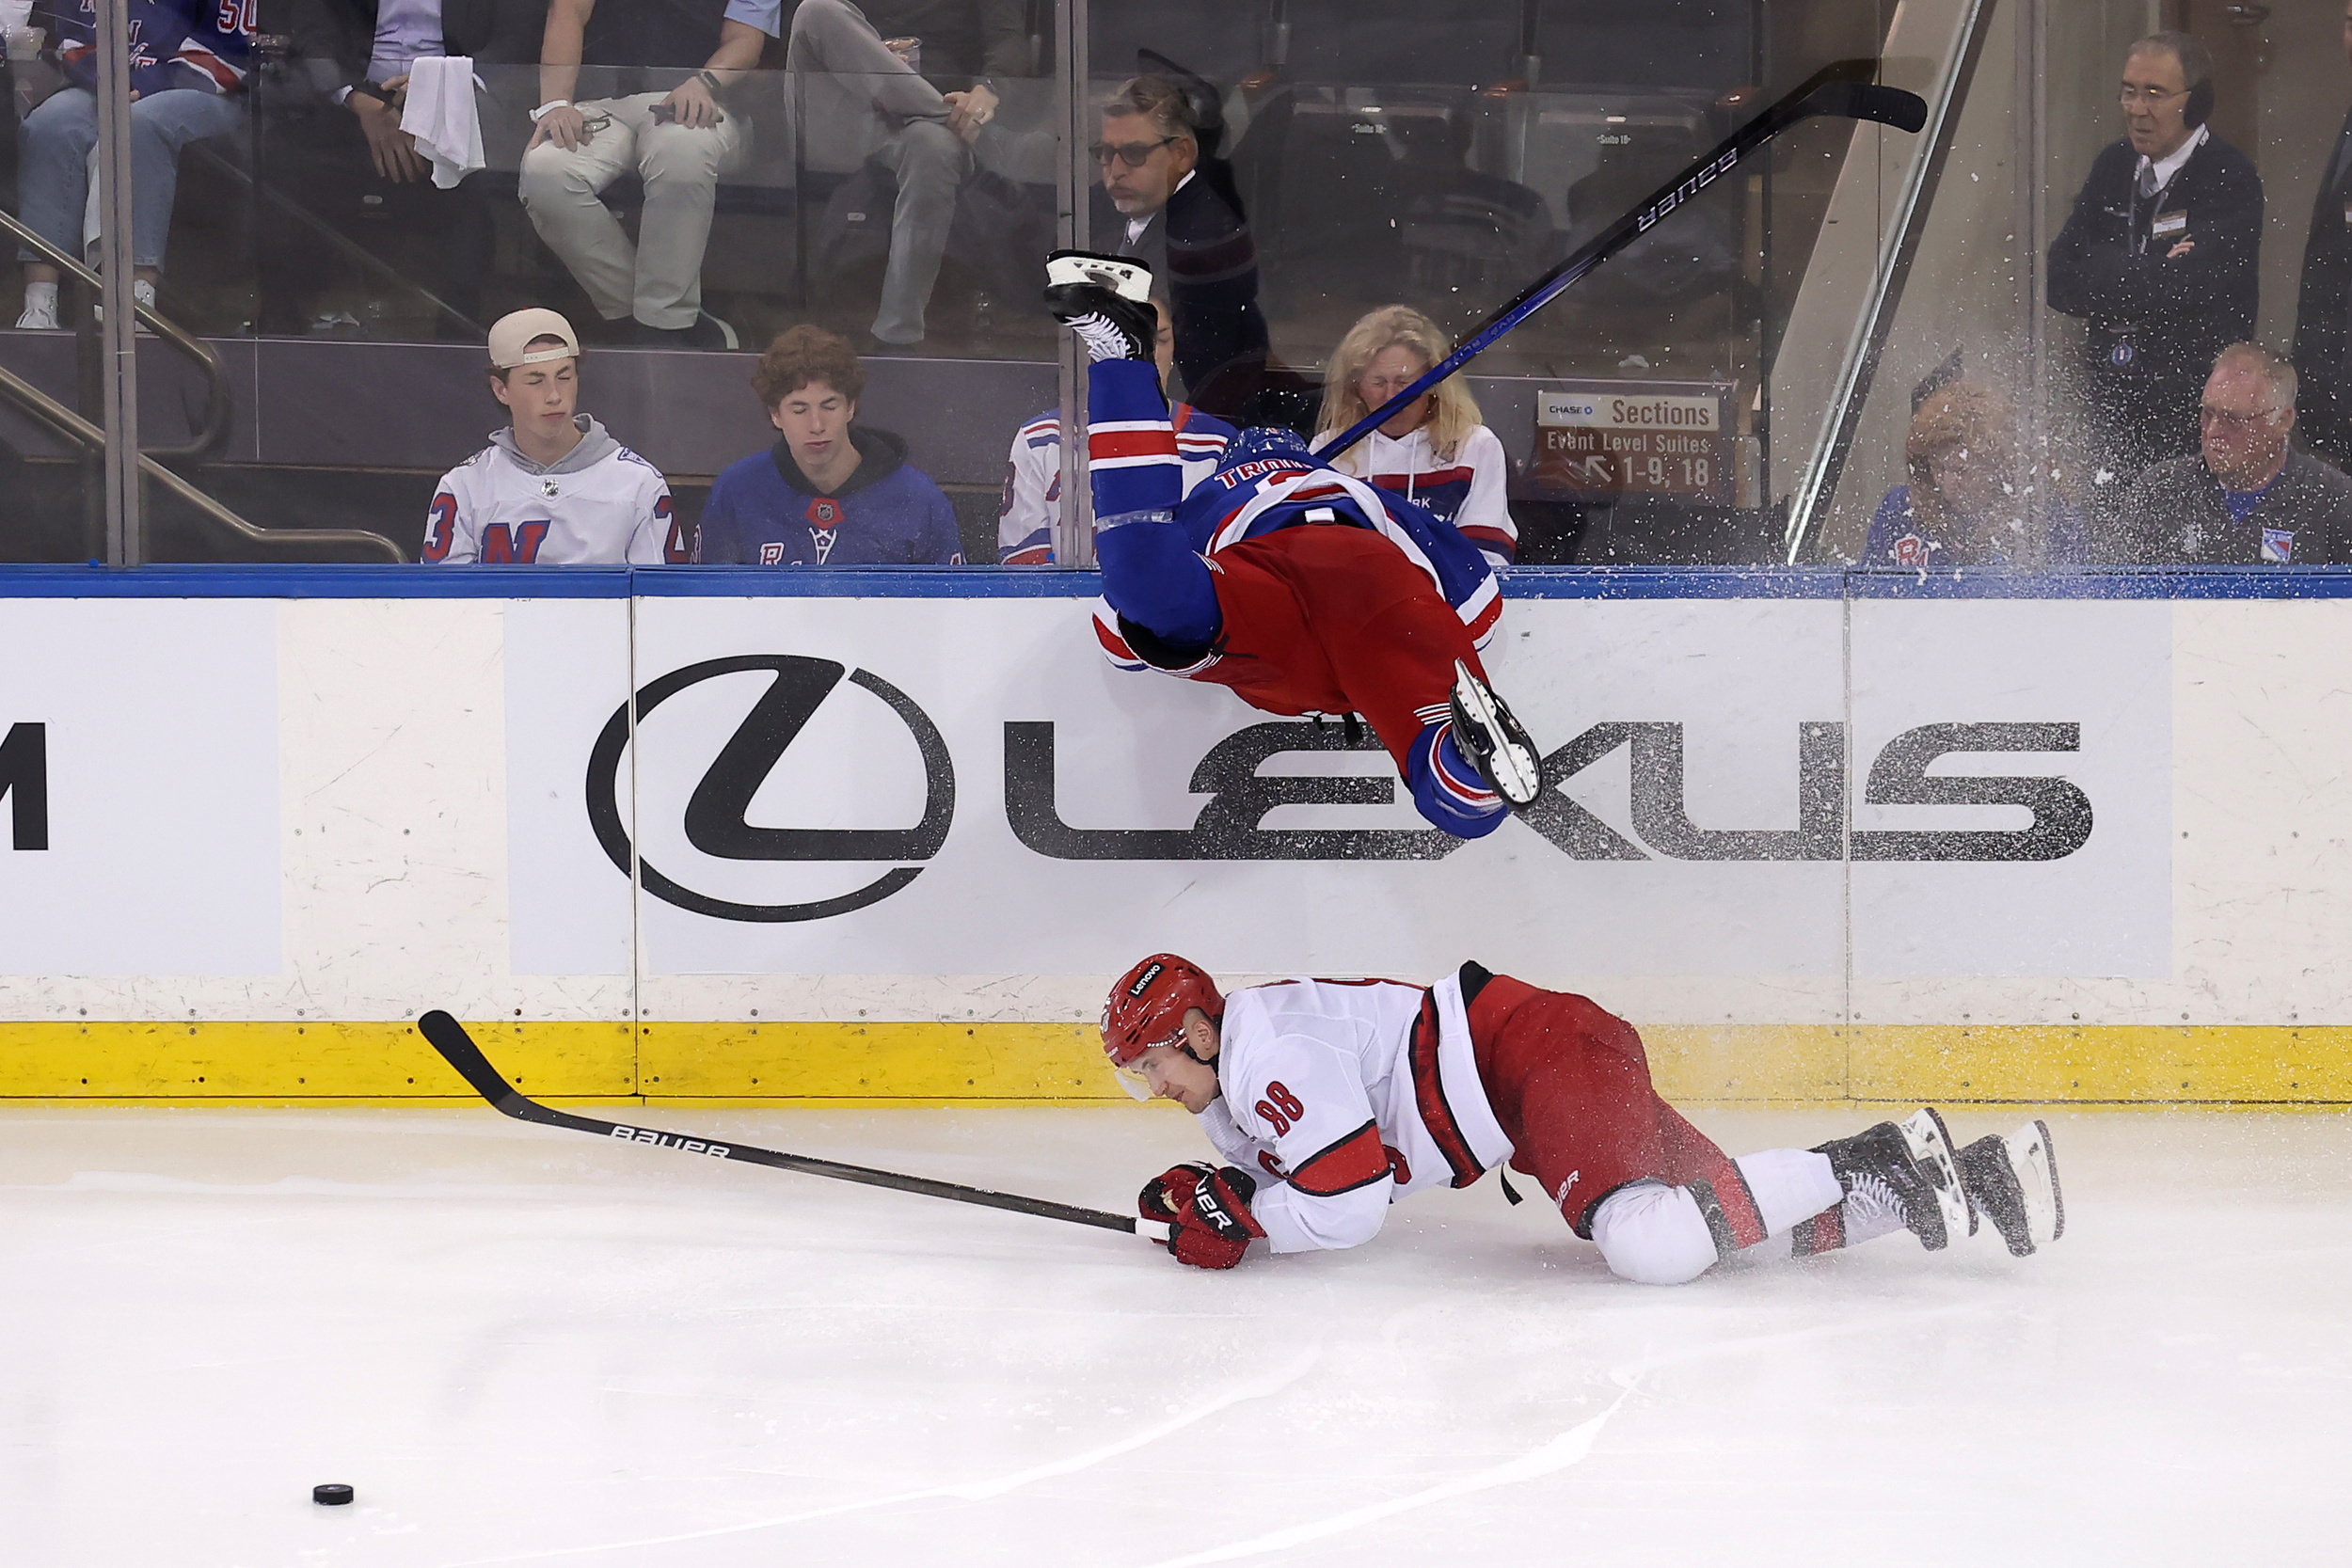 watch: rangers defenseman goes flying into boards during game 2